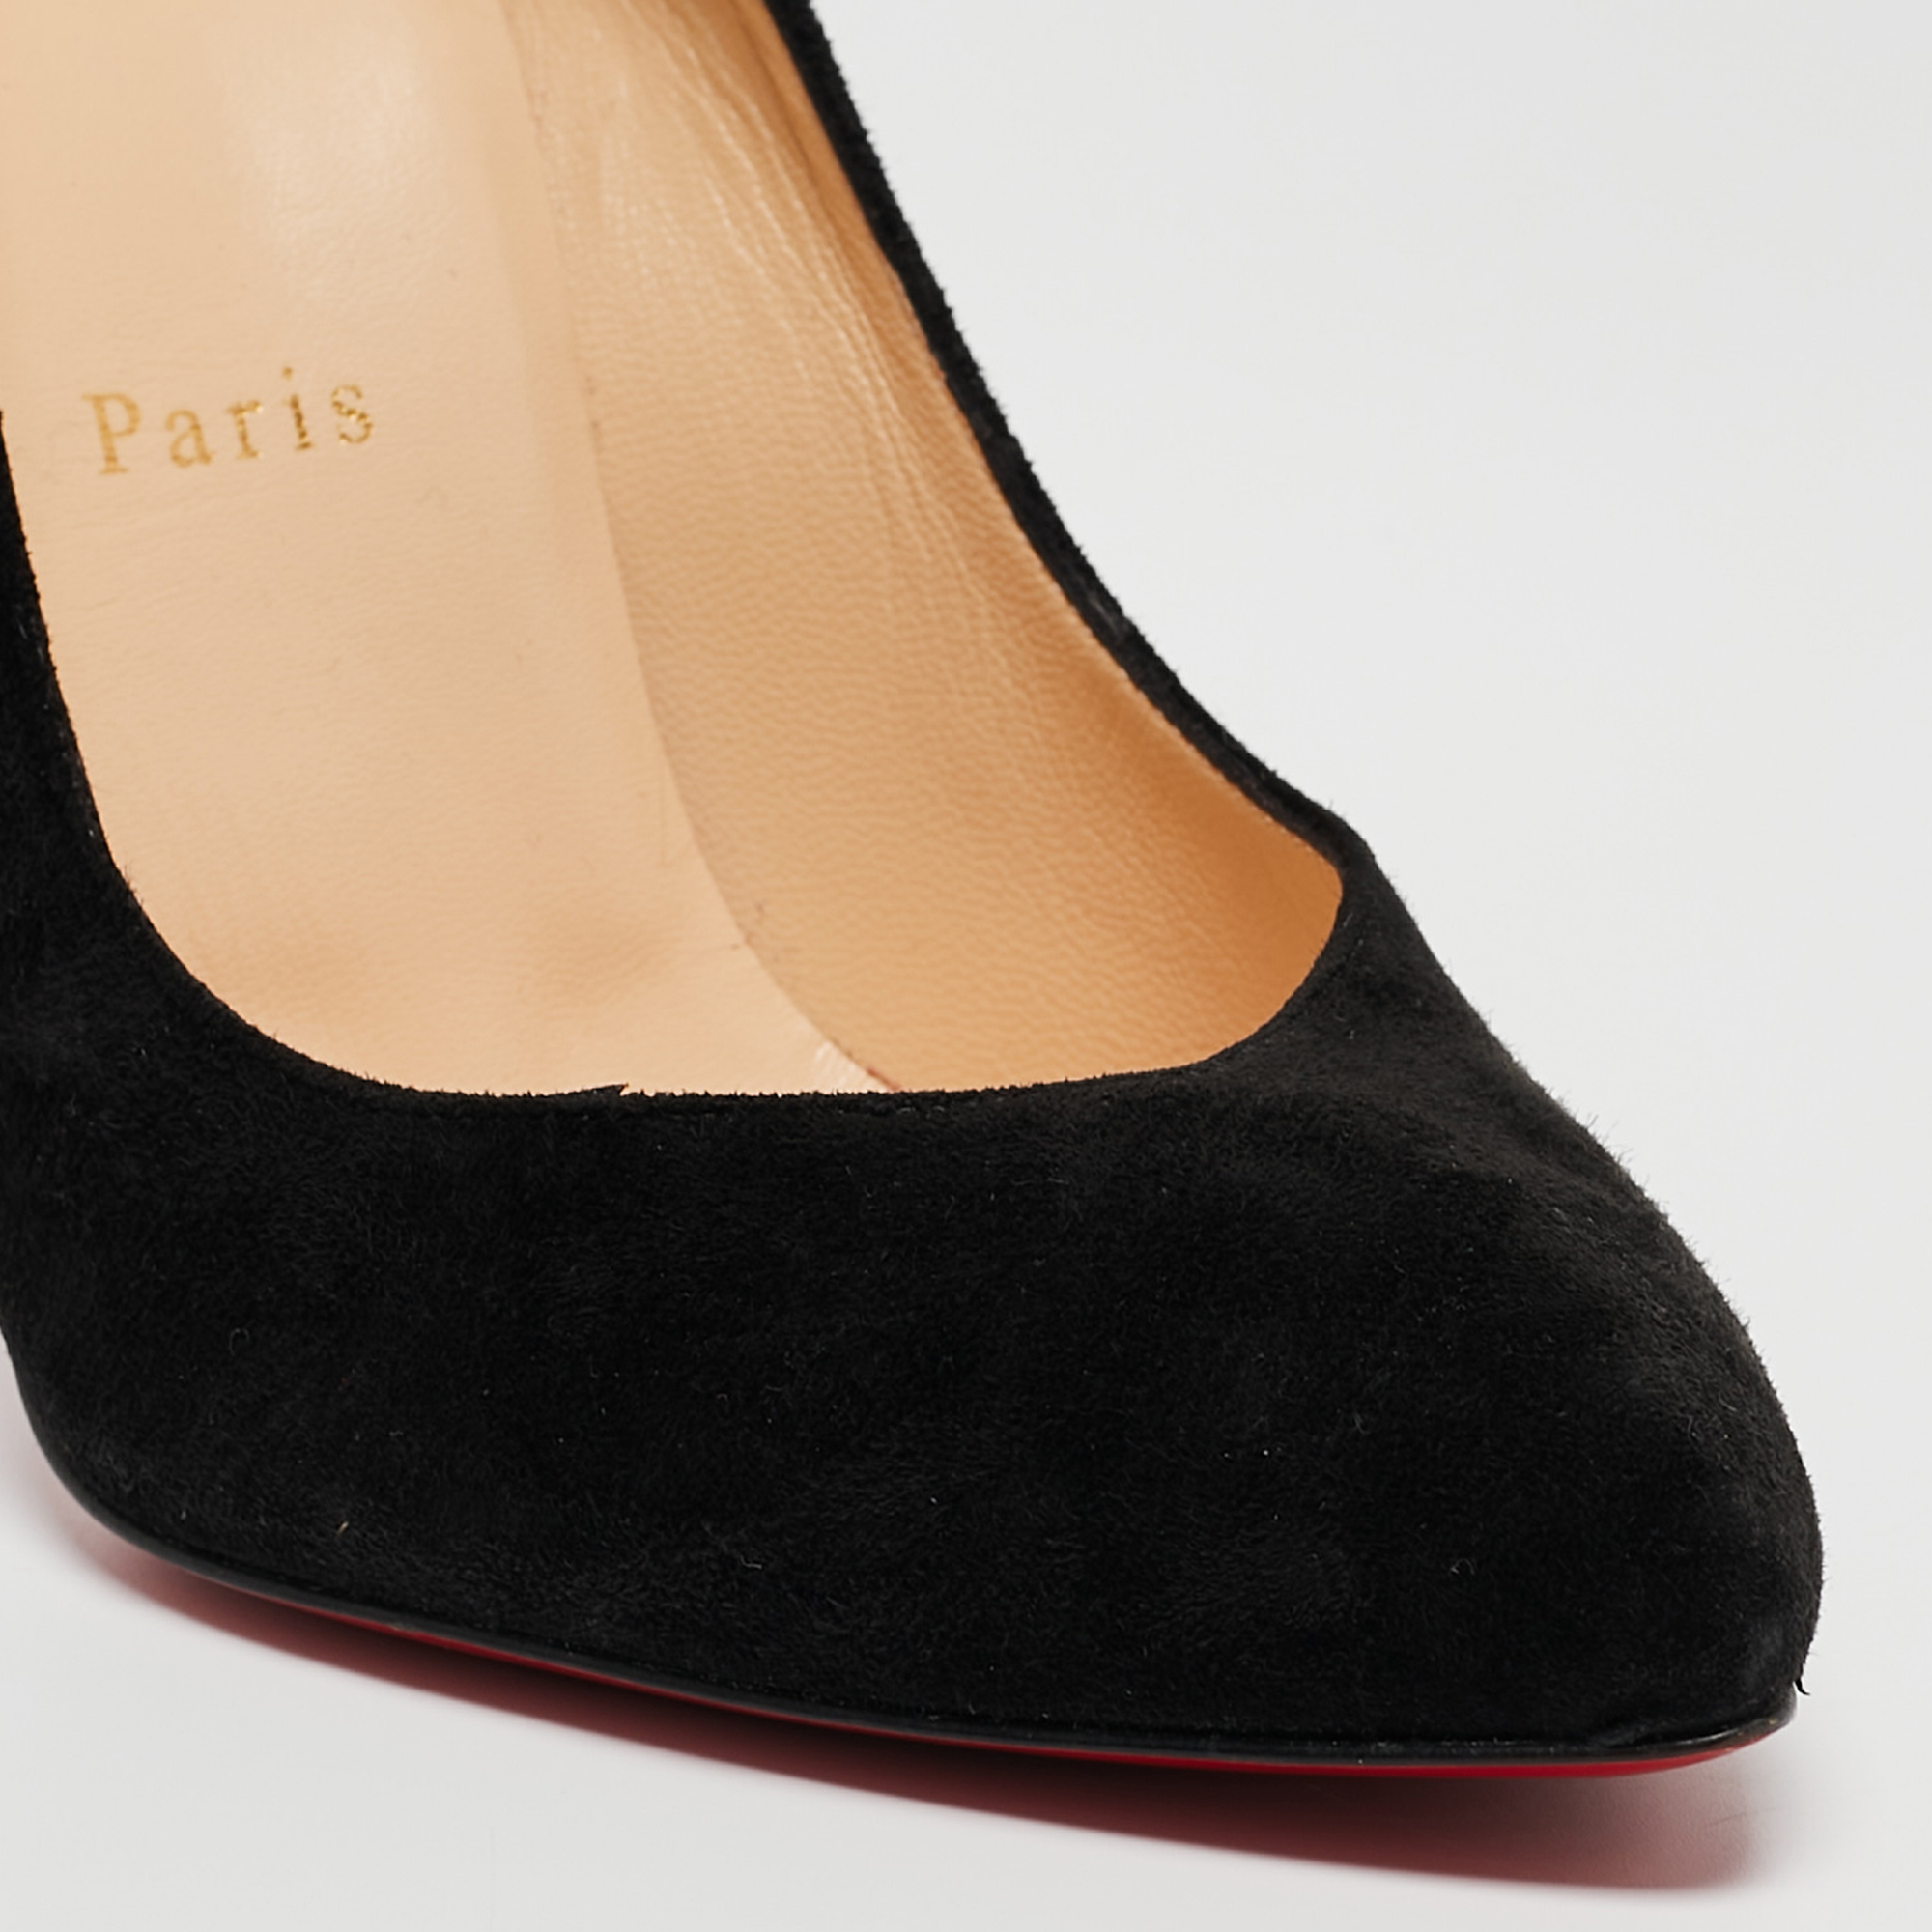 Christian Louboutin Black Suede Pointed Toe Pumps Size 38.5